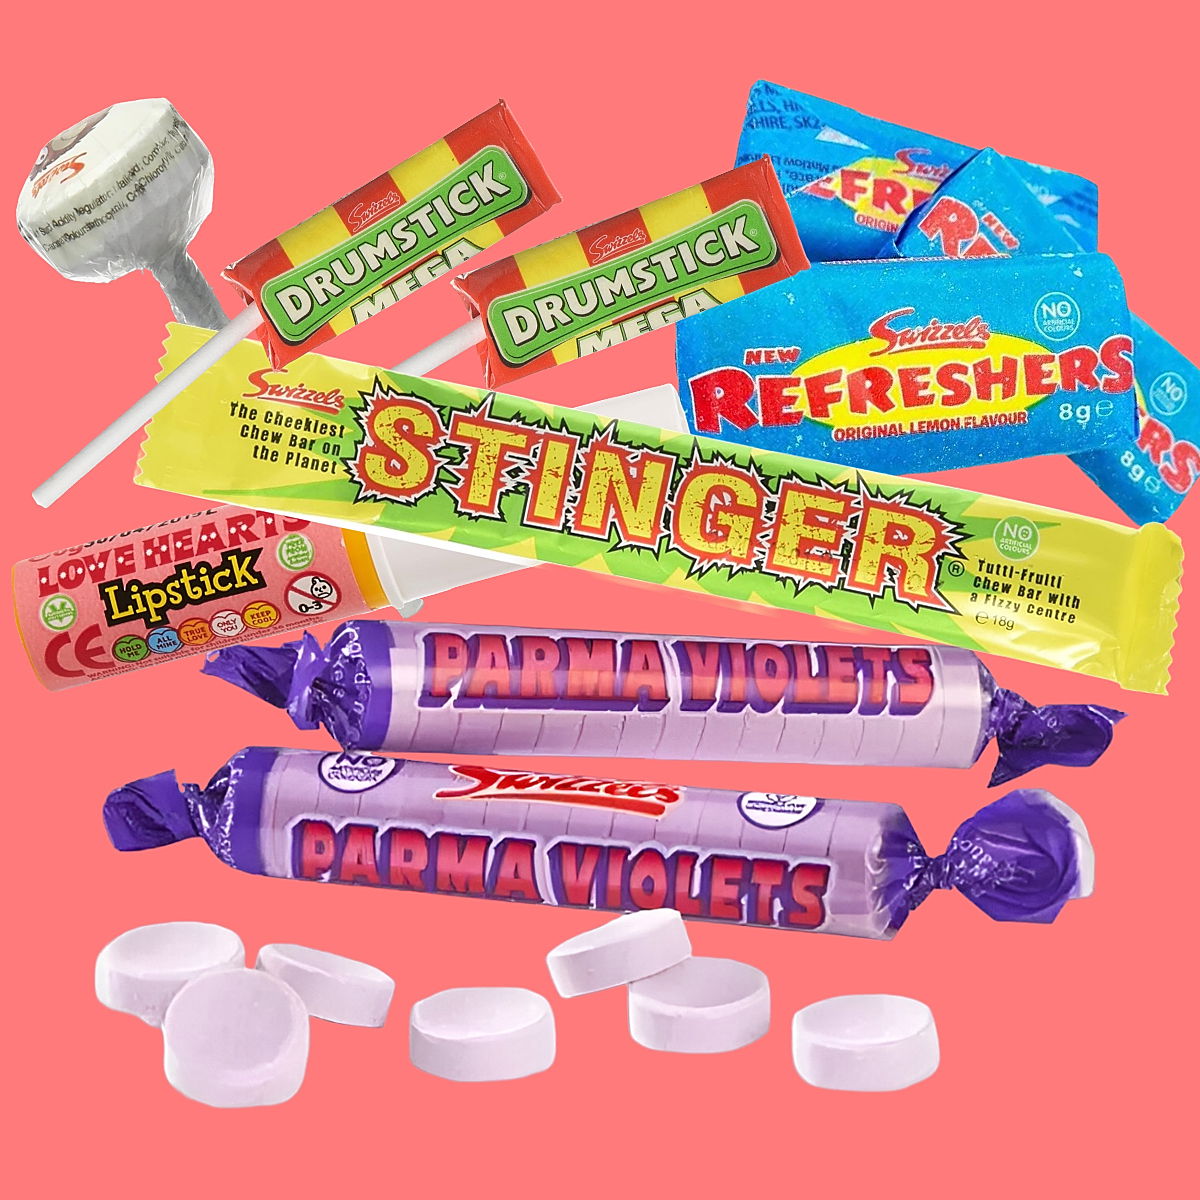 A selection of Swizzels Sweets inc. Parma Violets, Stinger, Candy Lipstick, Drumstick, Refreshers